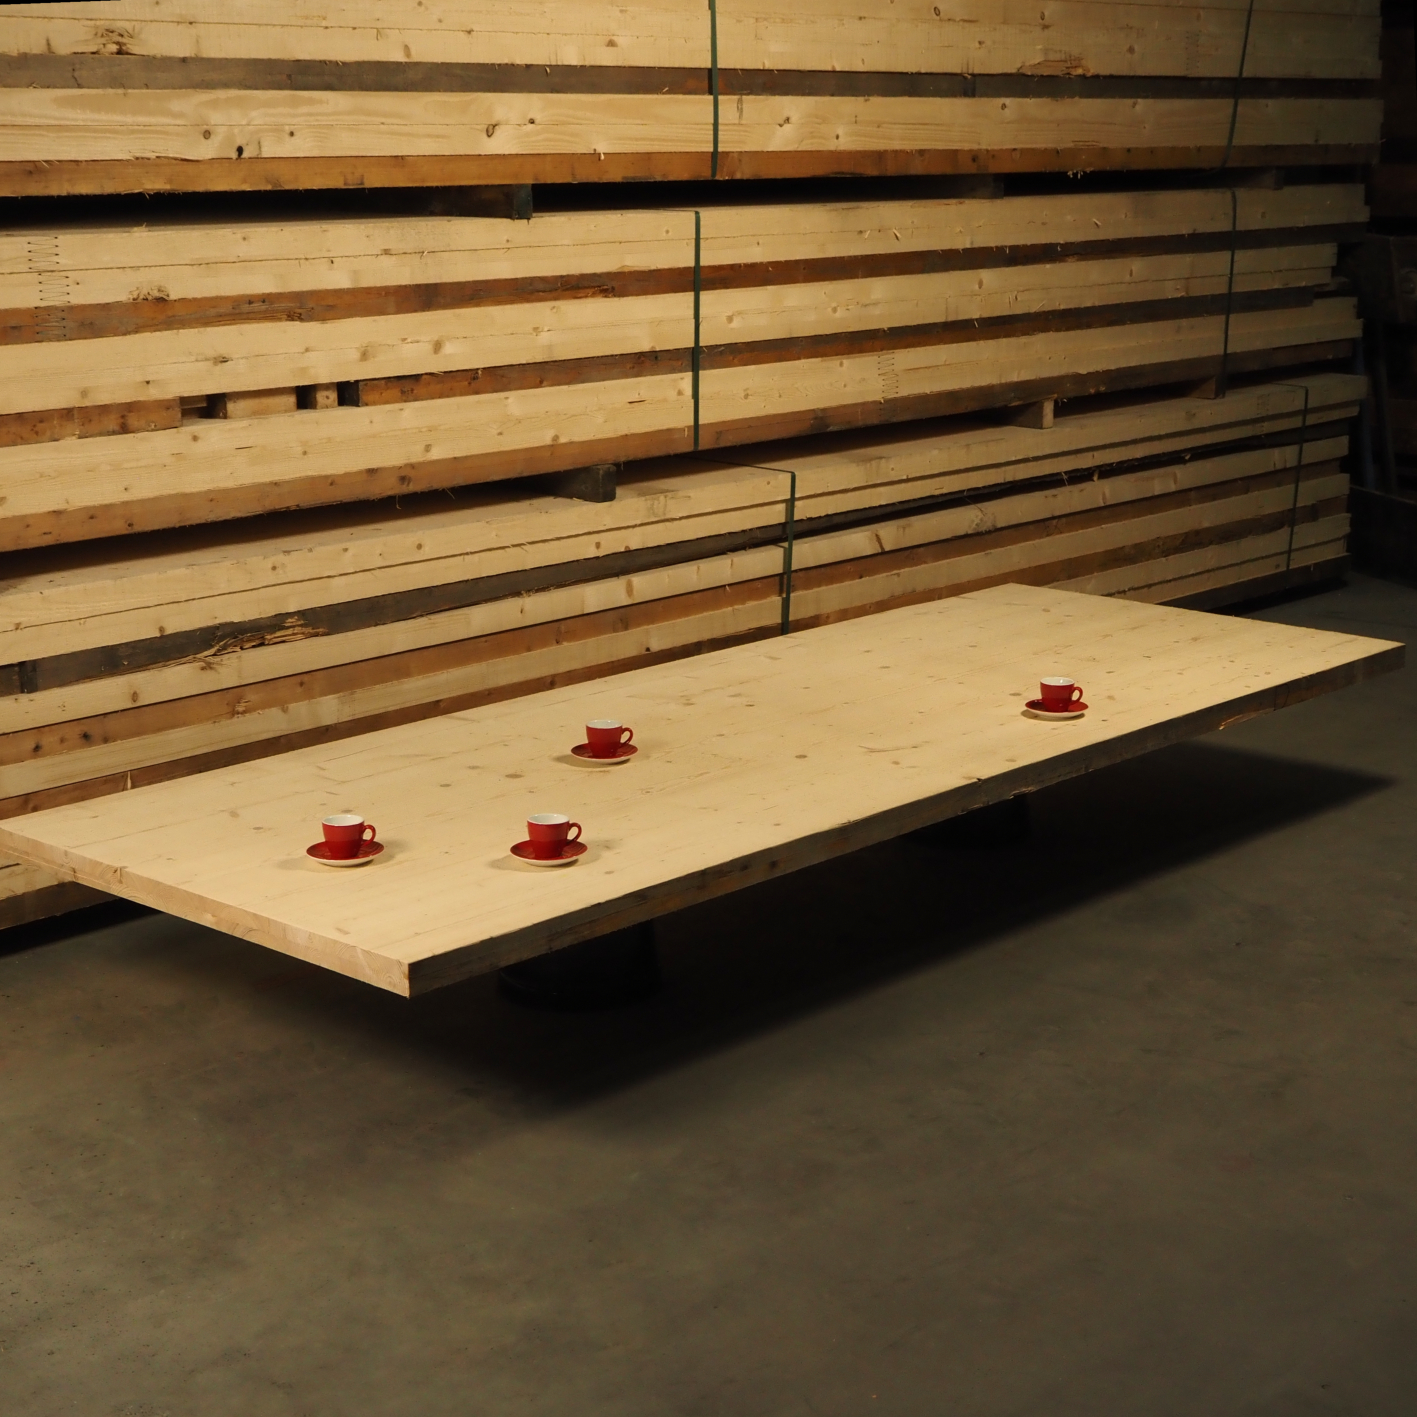 Glued laminated timber panel (5.5 cm thick - 270 cm length)